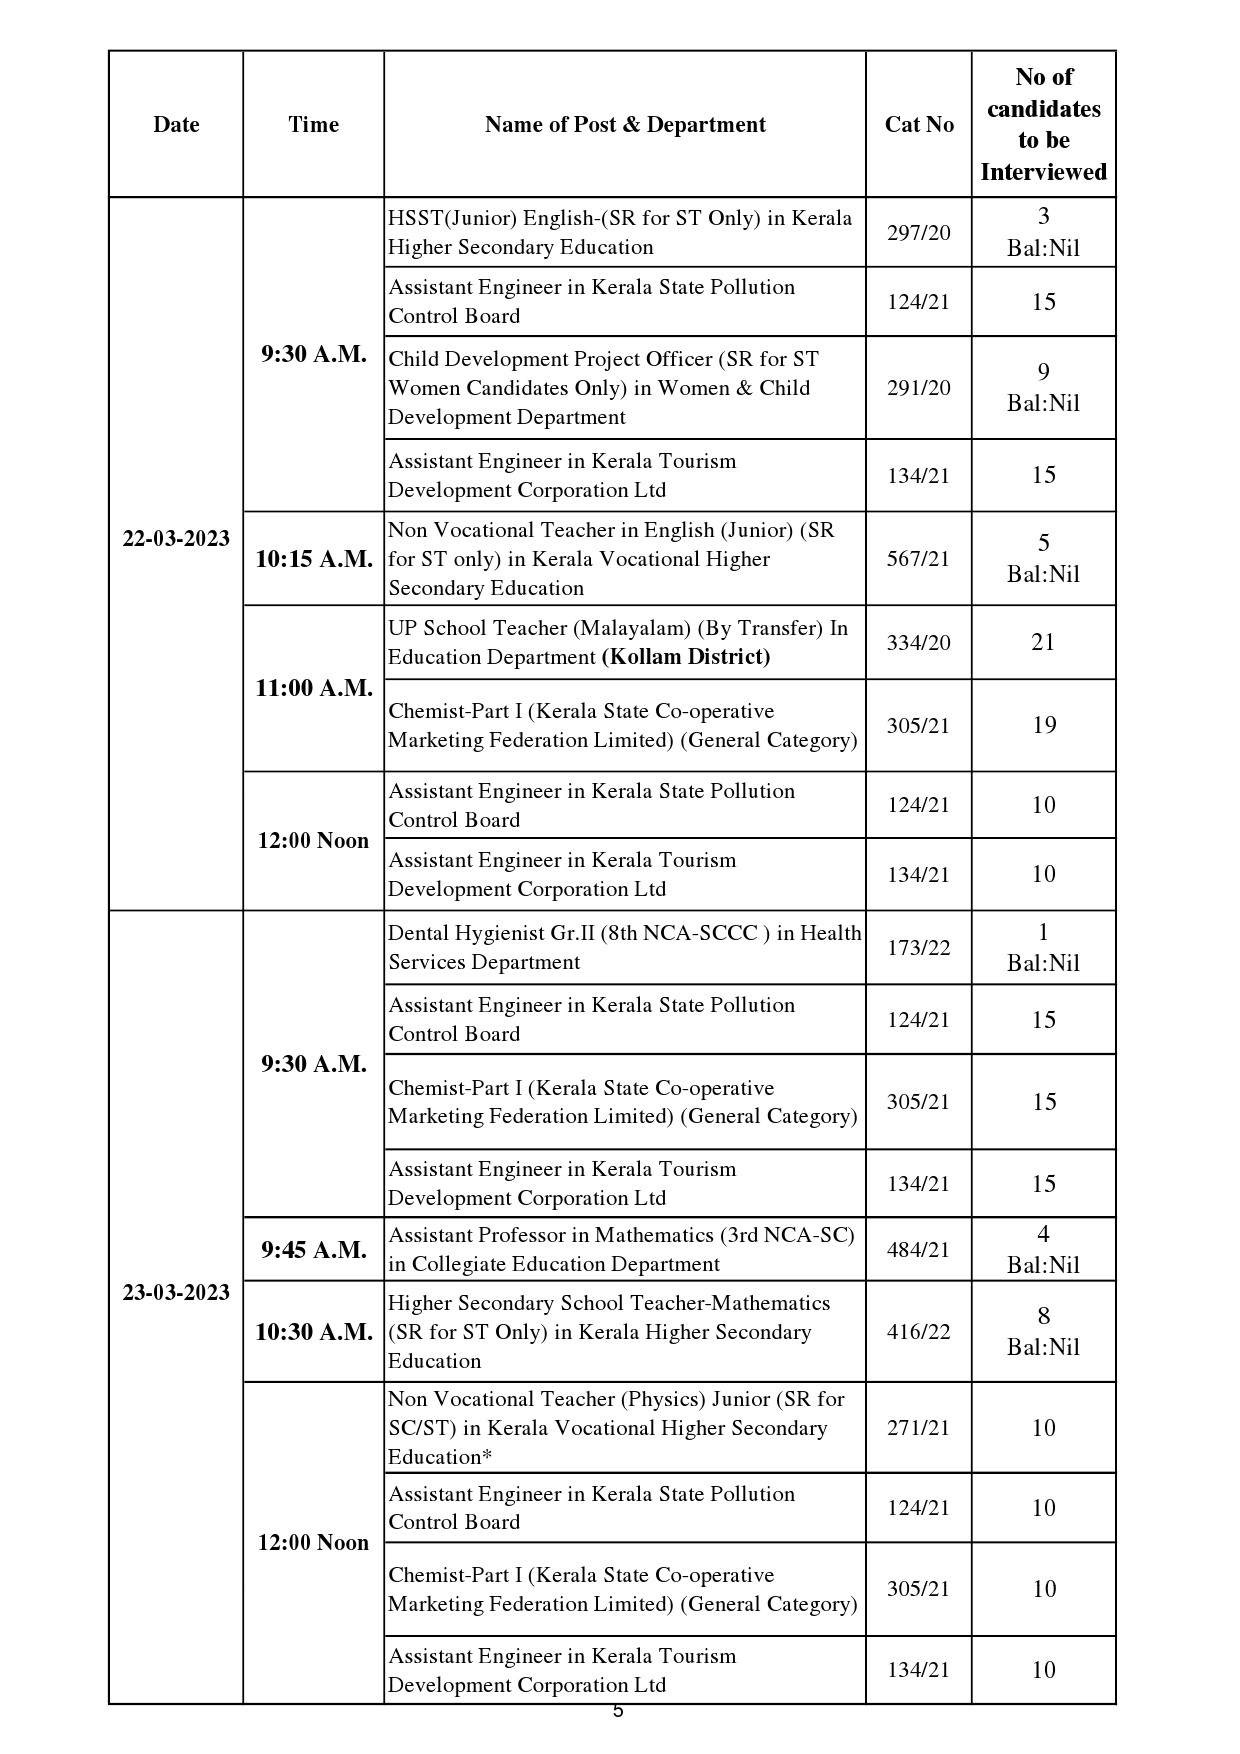 Interview Programme For The Month Of March 2023 - Notification Image 5